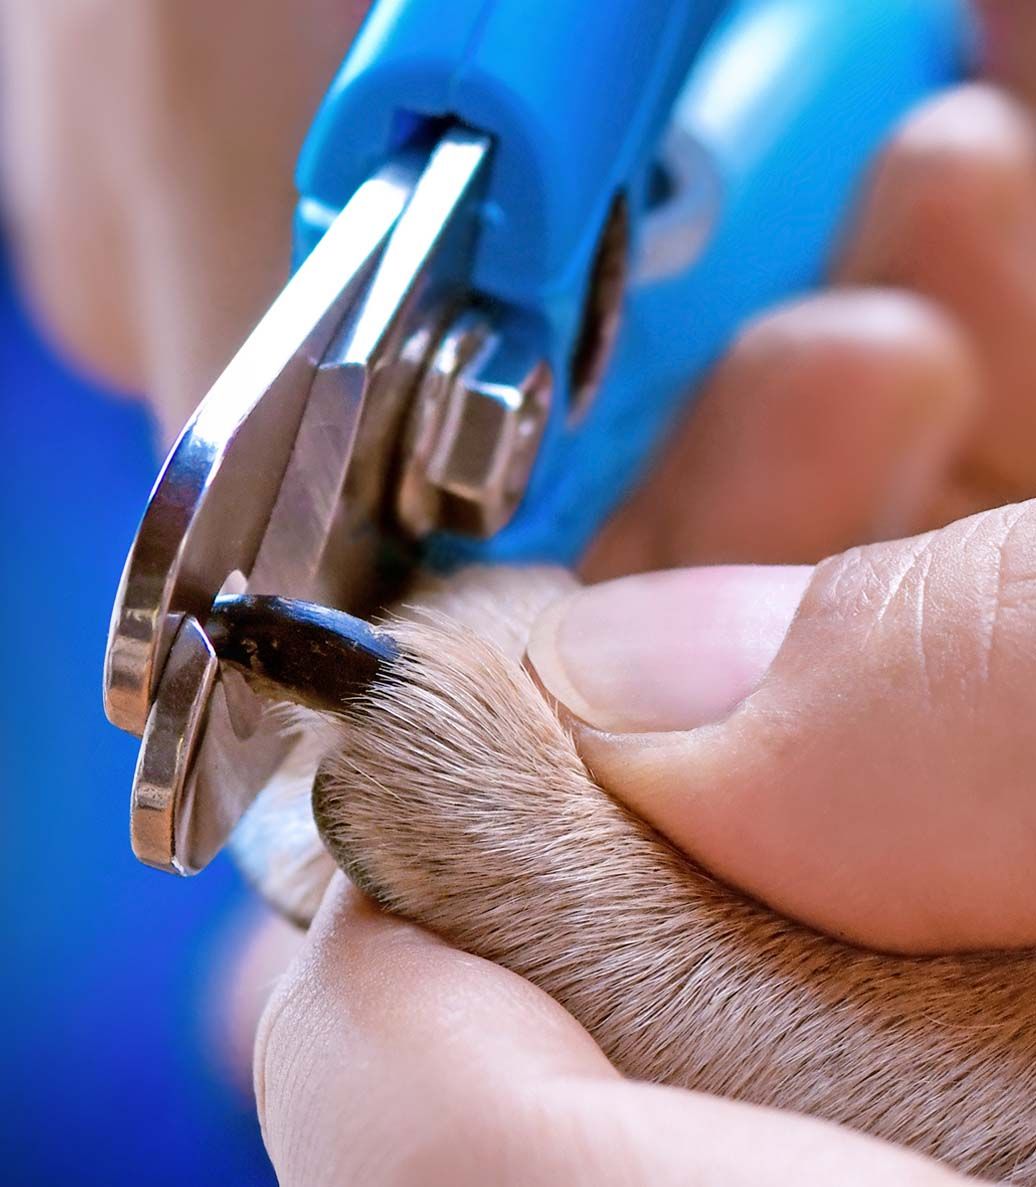 The Fast and Stress-Free Way to Trim Your Dog's Nails